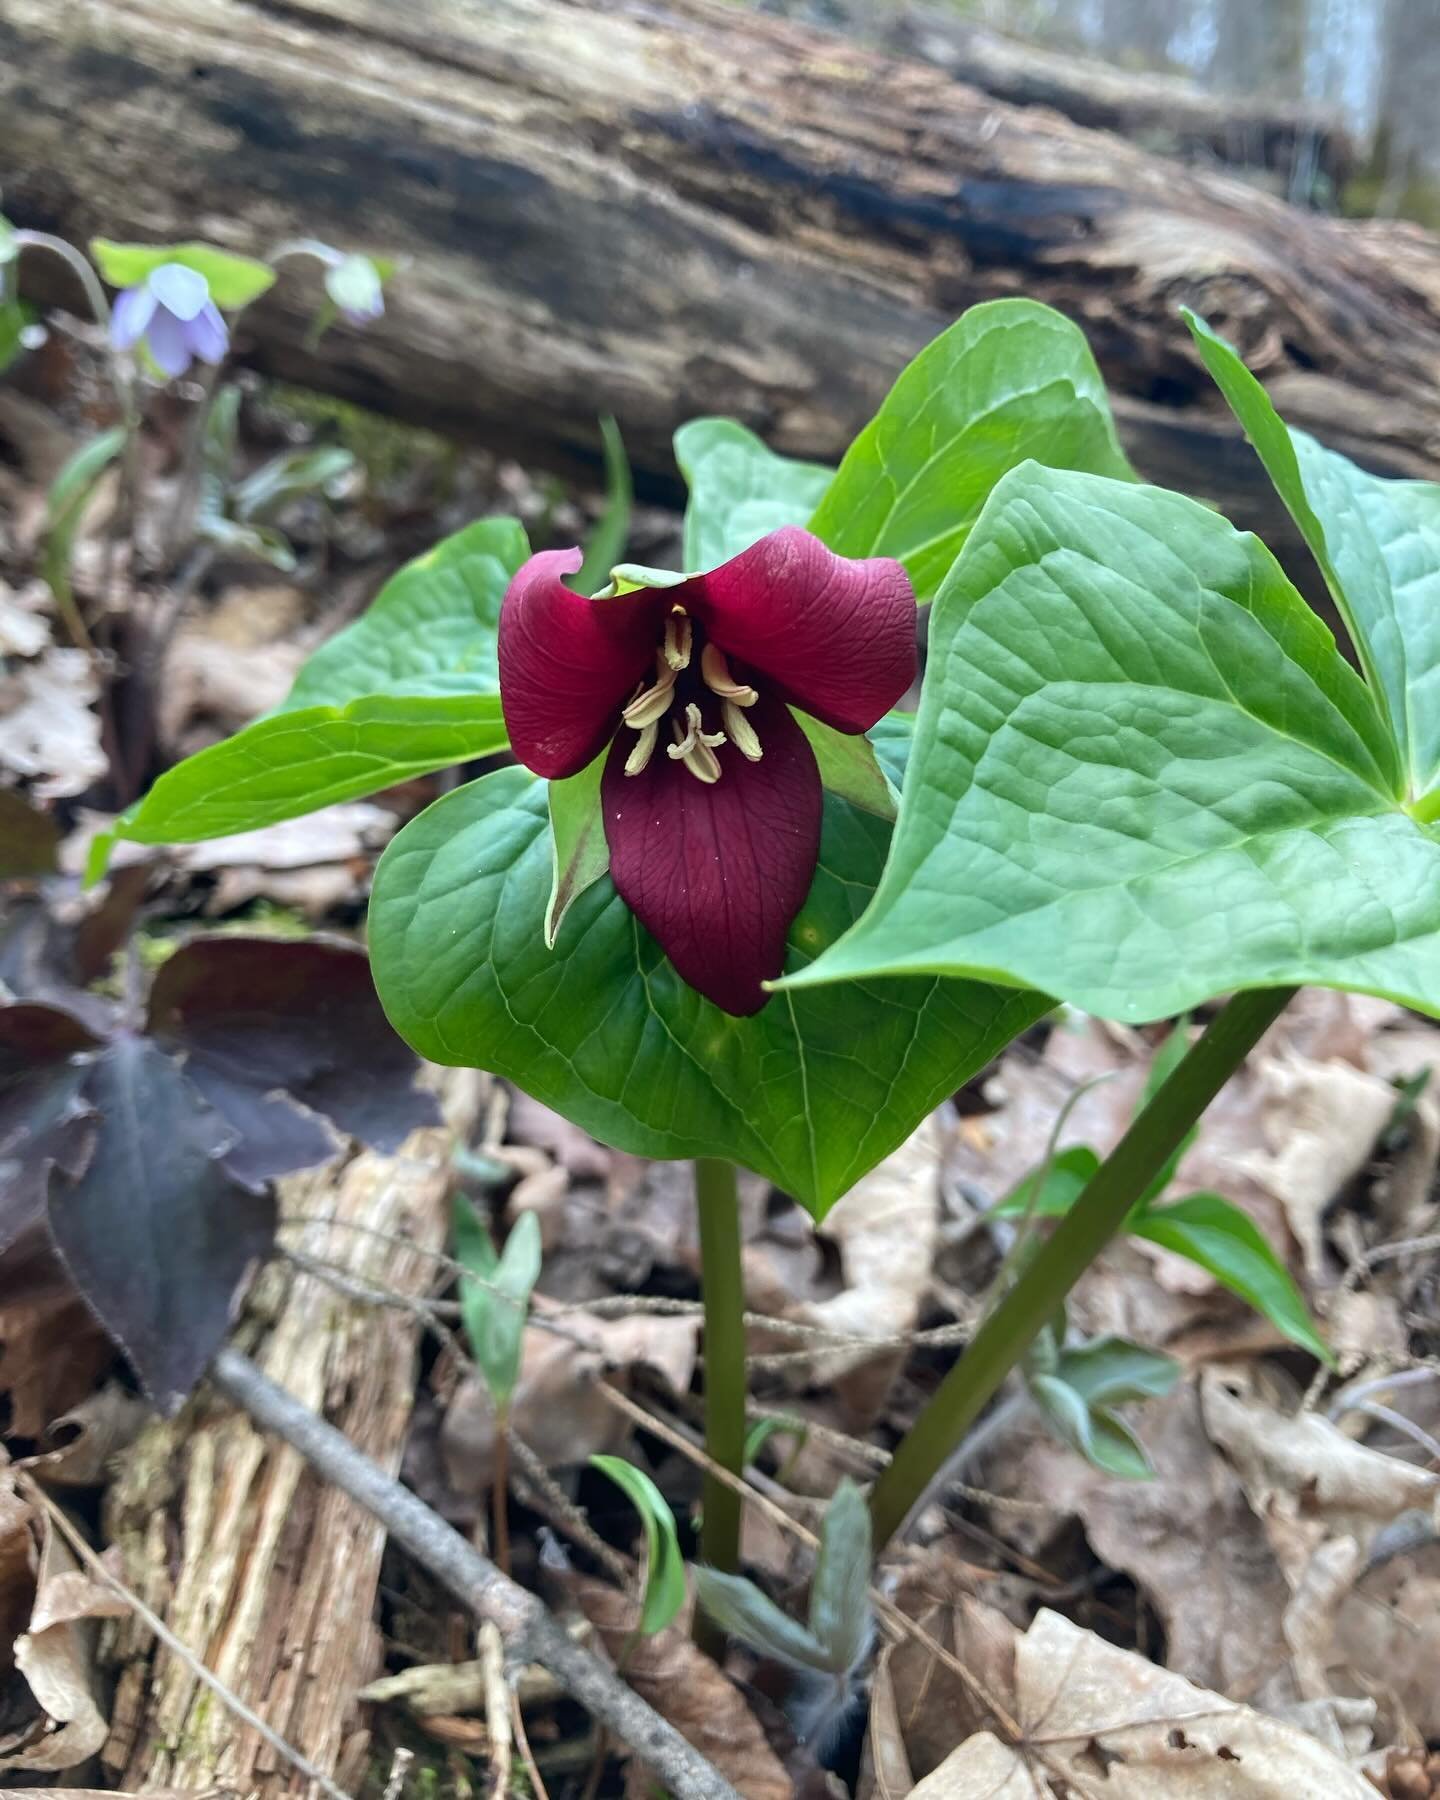 Spring flowers are emerging in the woods! These ephemerals put on a great show during the window between snow melt and leaf out. All of these photos are from the TAM in Otter Creek Gorge and Wright Park! 
What have you seen blooming this week?